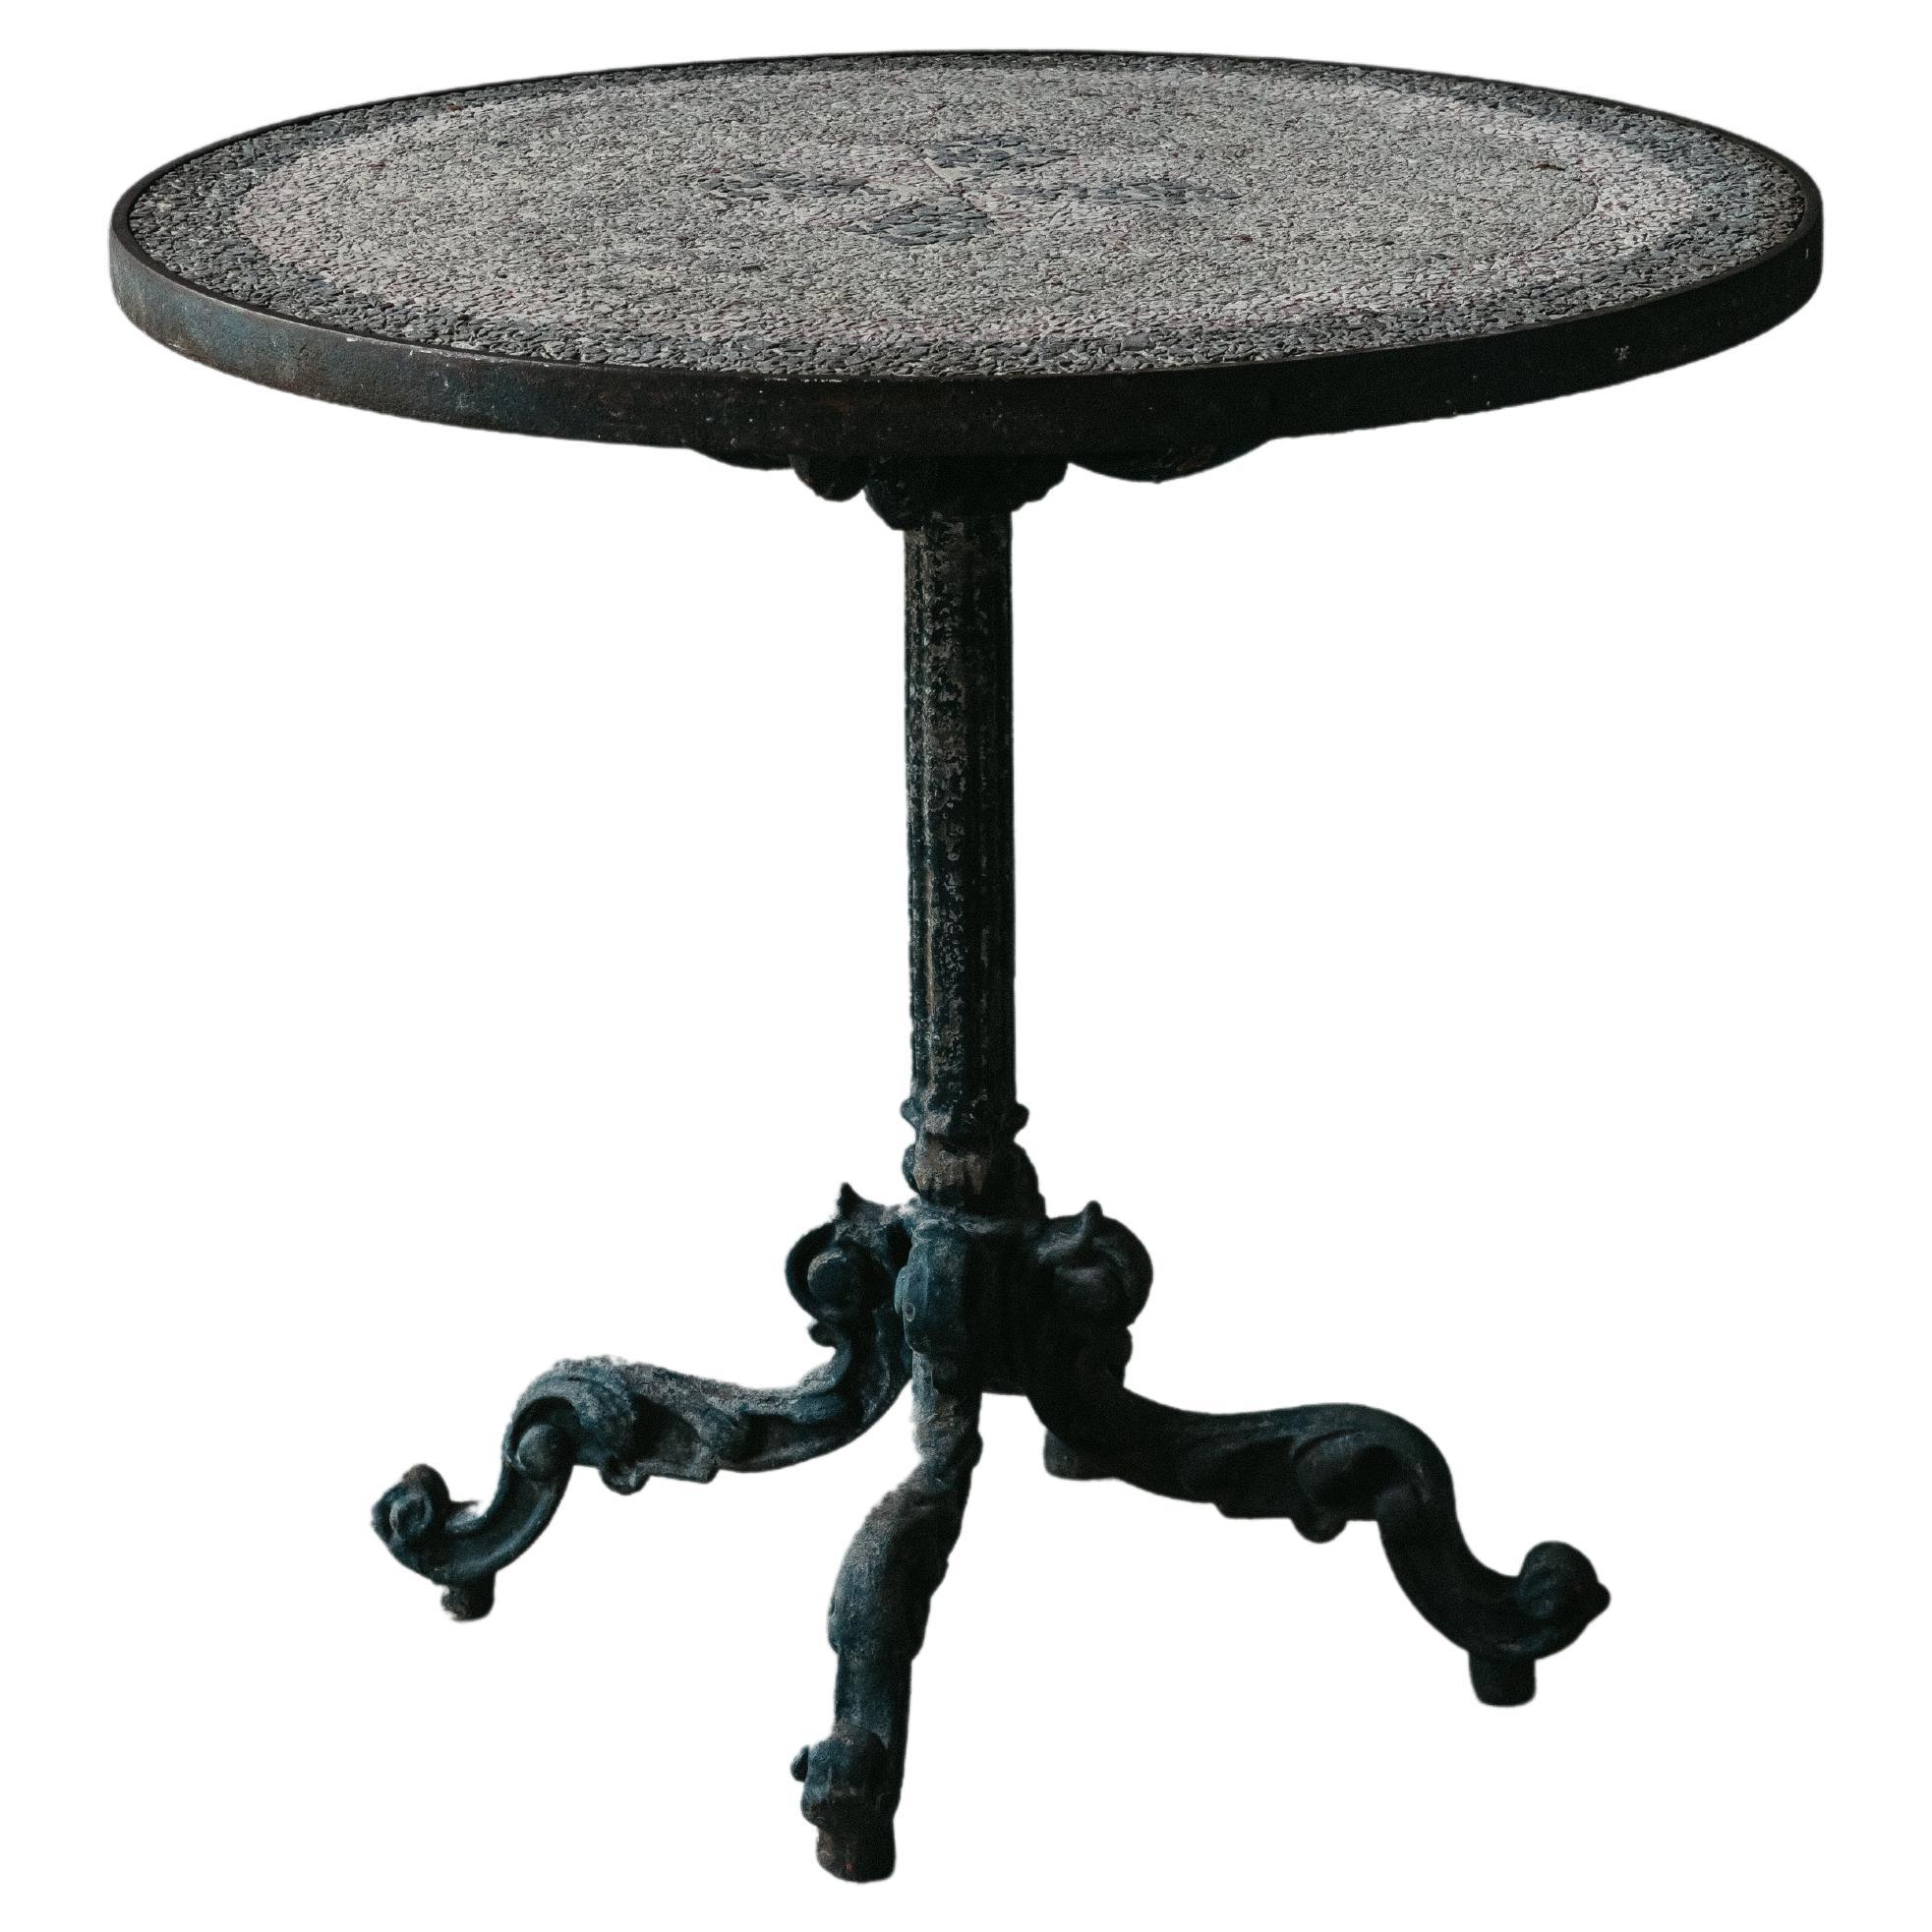 Early Cast Iron Garden Table From France, Circa 1930 For Sale